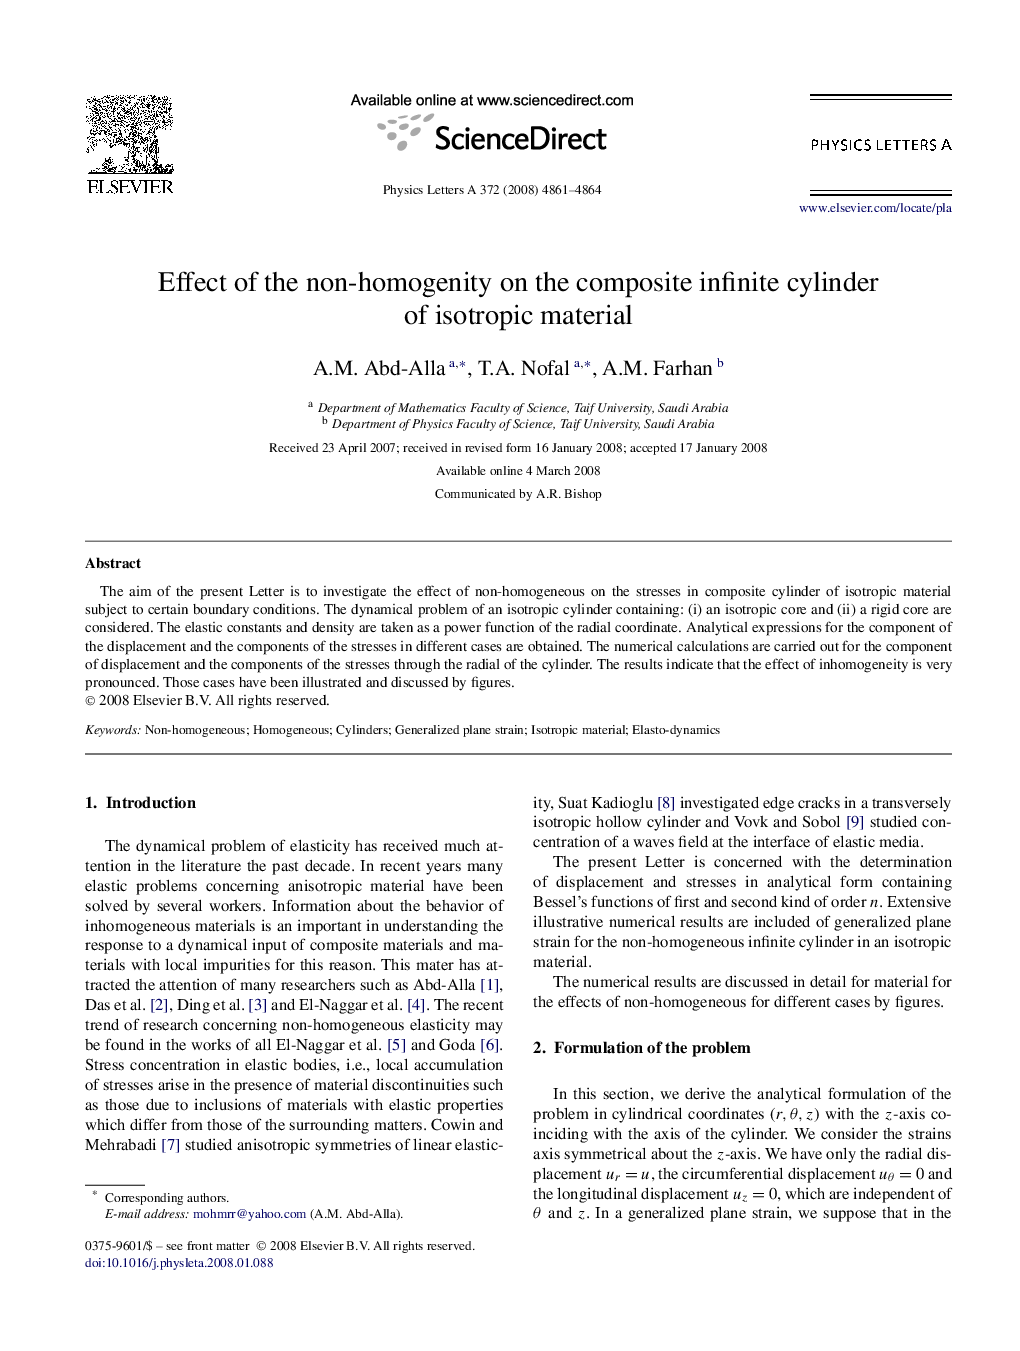 Effect of the non-homogenity on the composite infinite cylinder of isotropic material